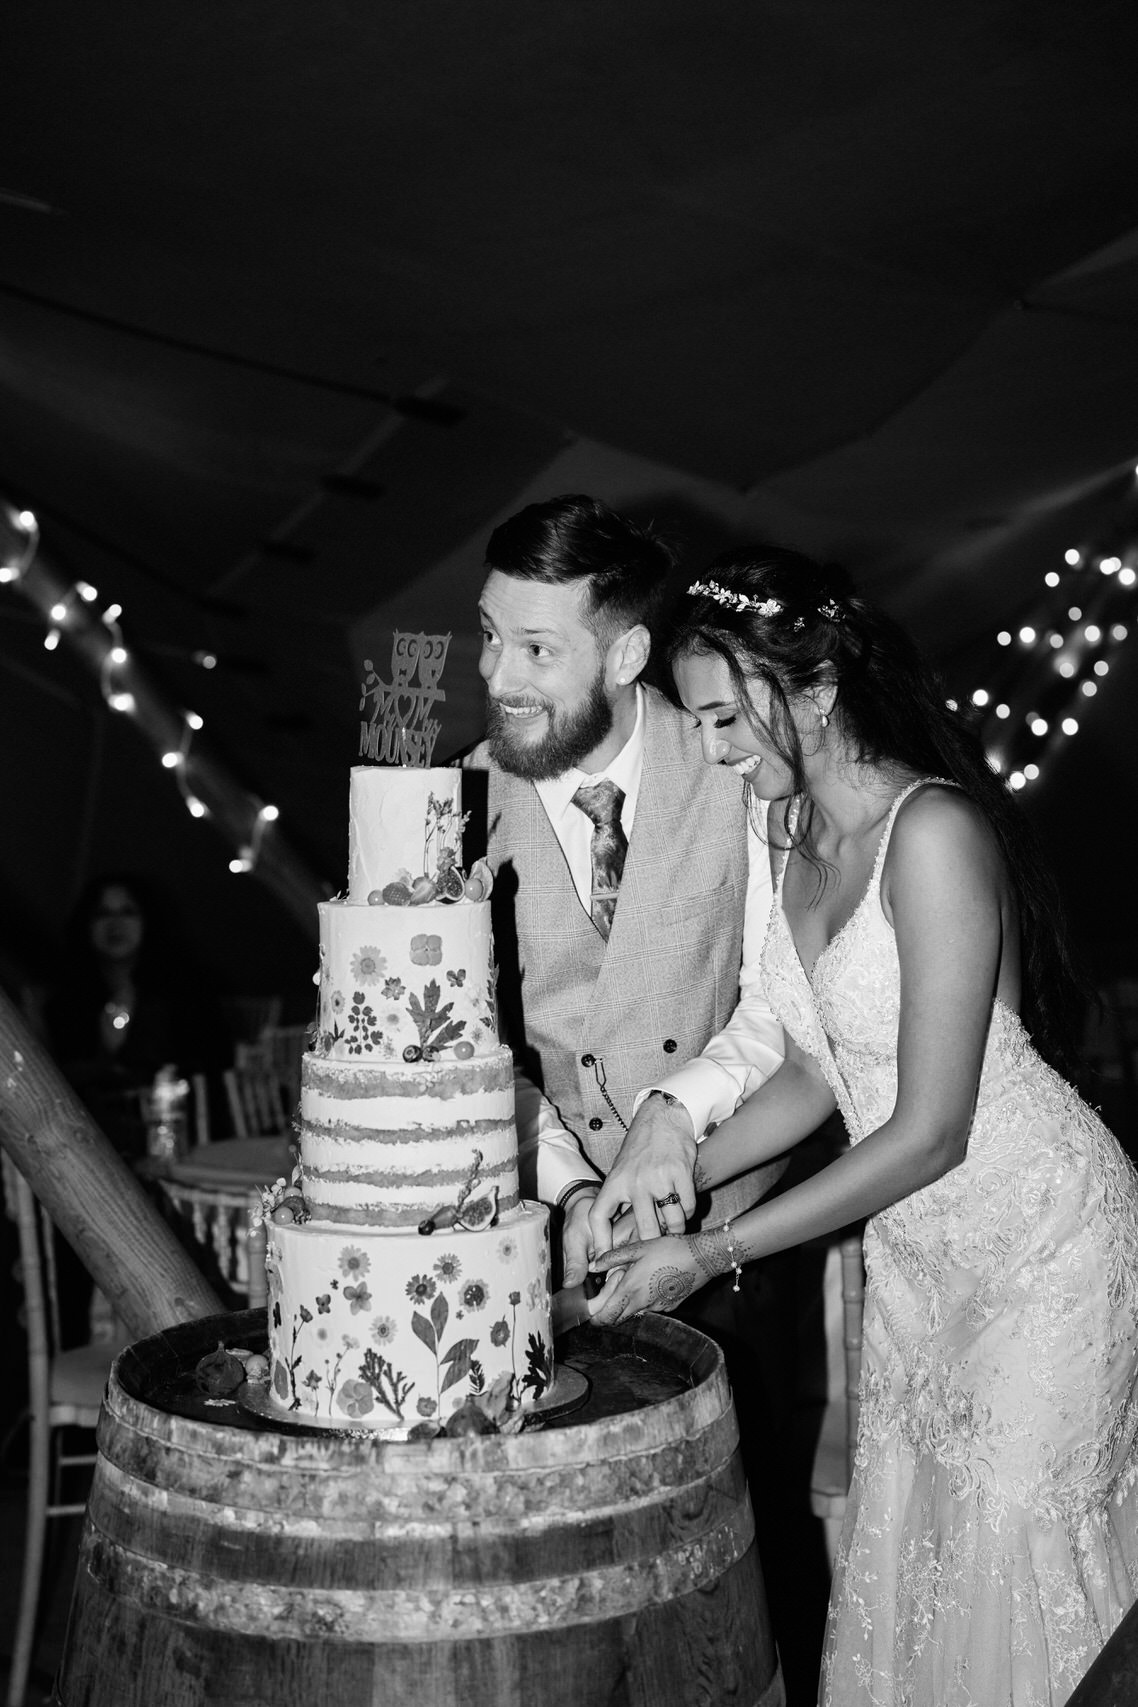 A couple slicing their wedding cake in a barrel.